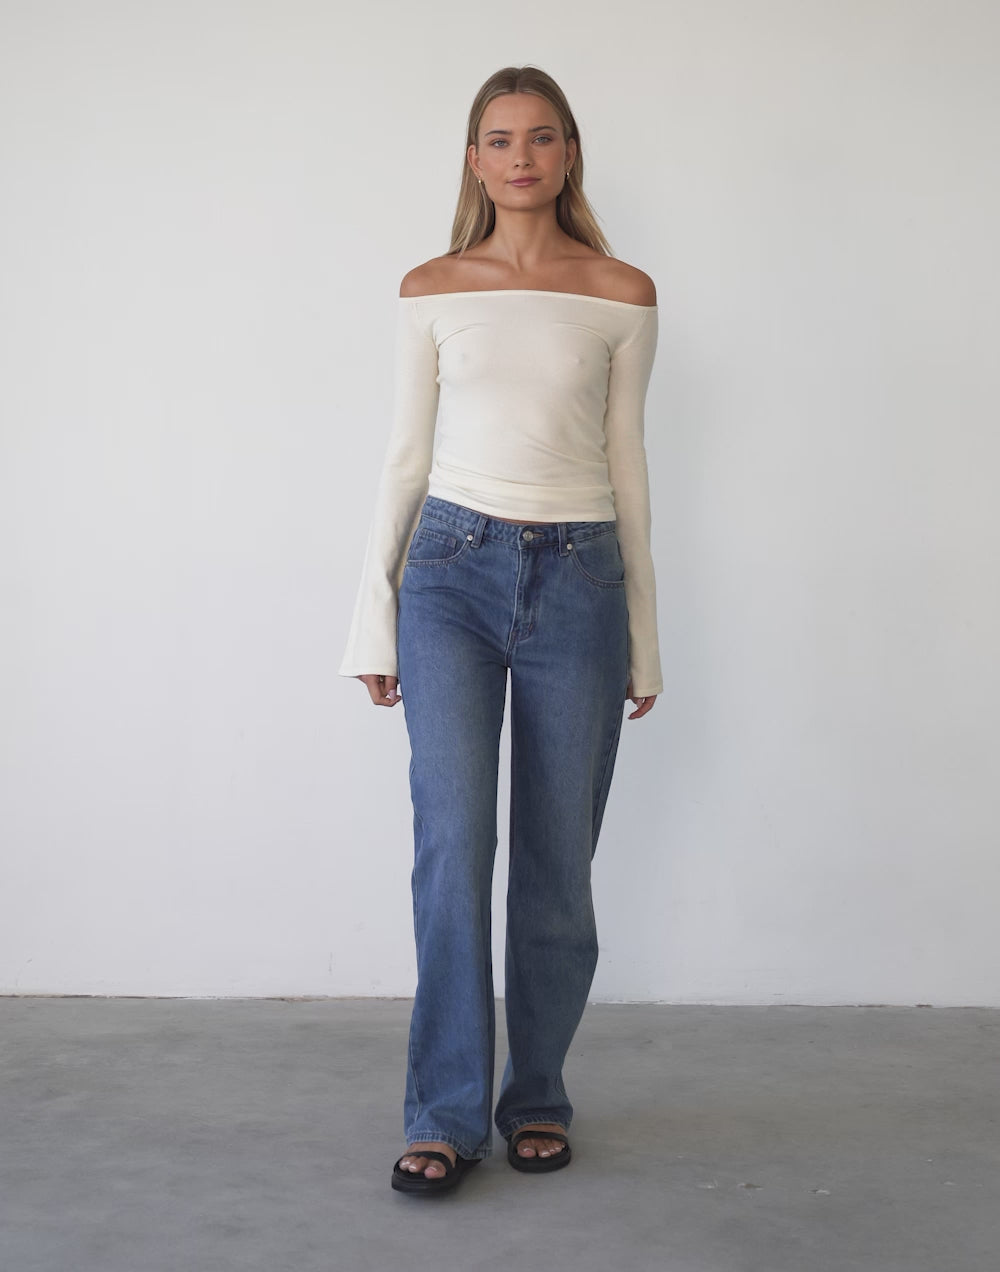 Luna Long Sleeve Knit Top (Off White)